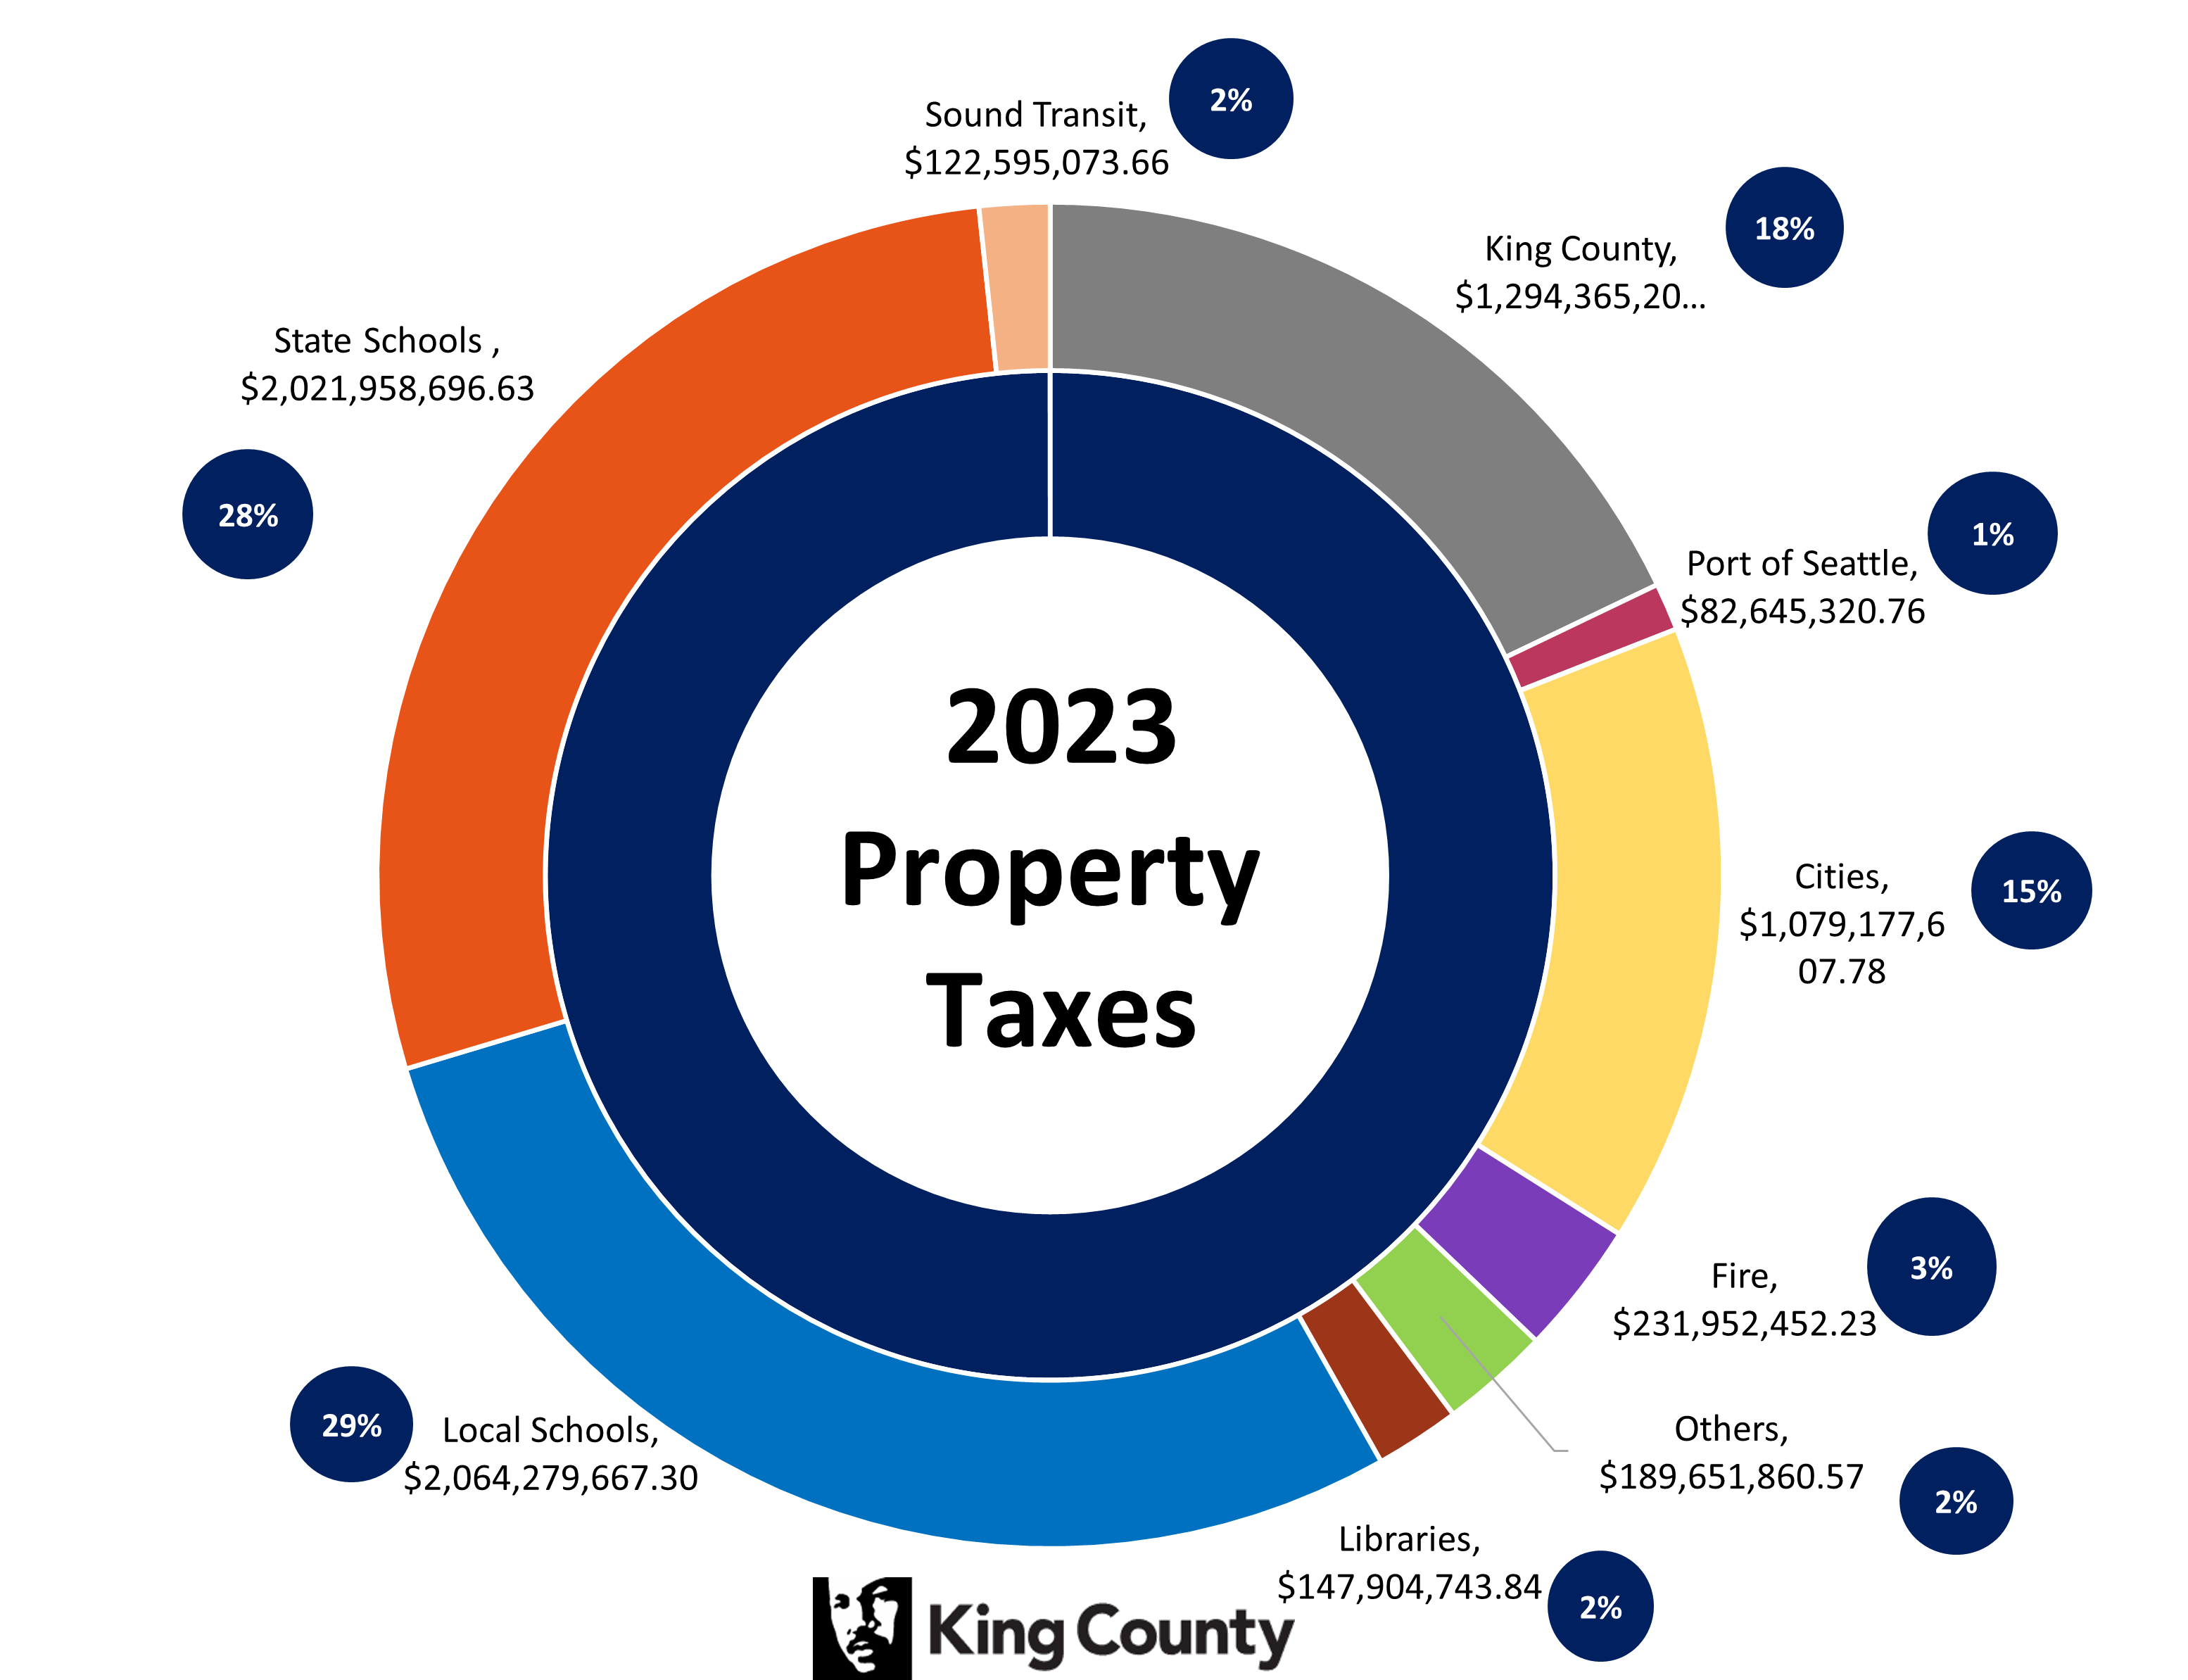 2023 Property Taxes Pie Chart